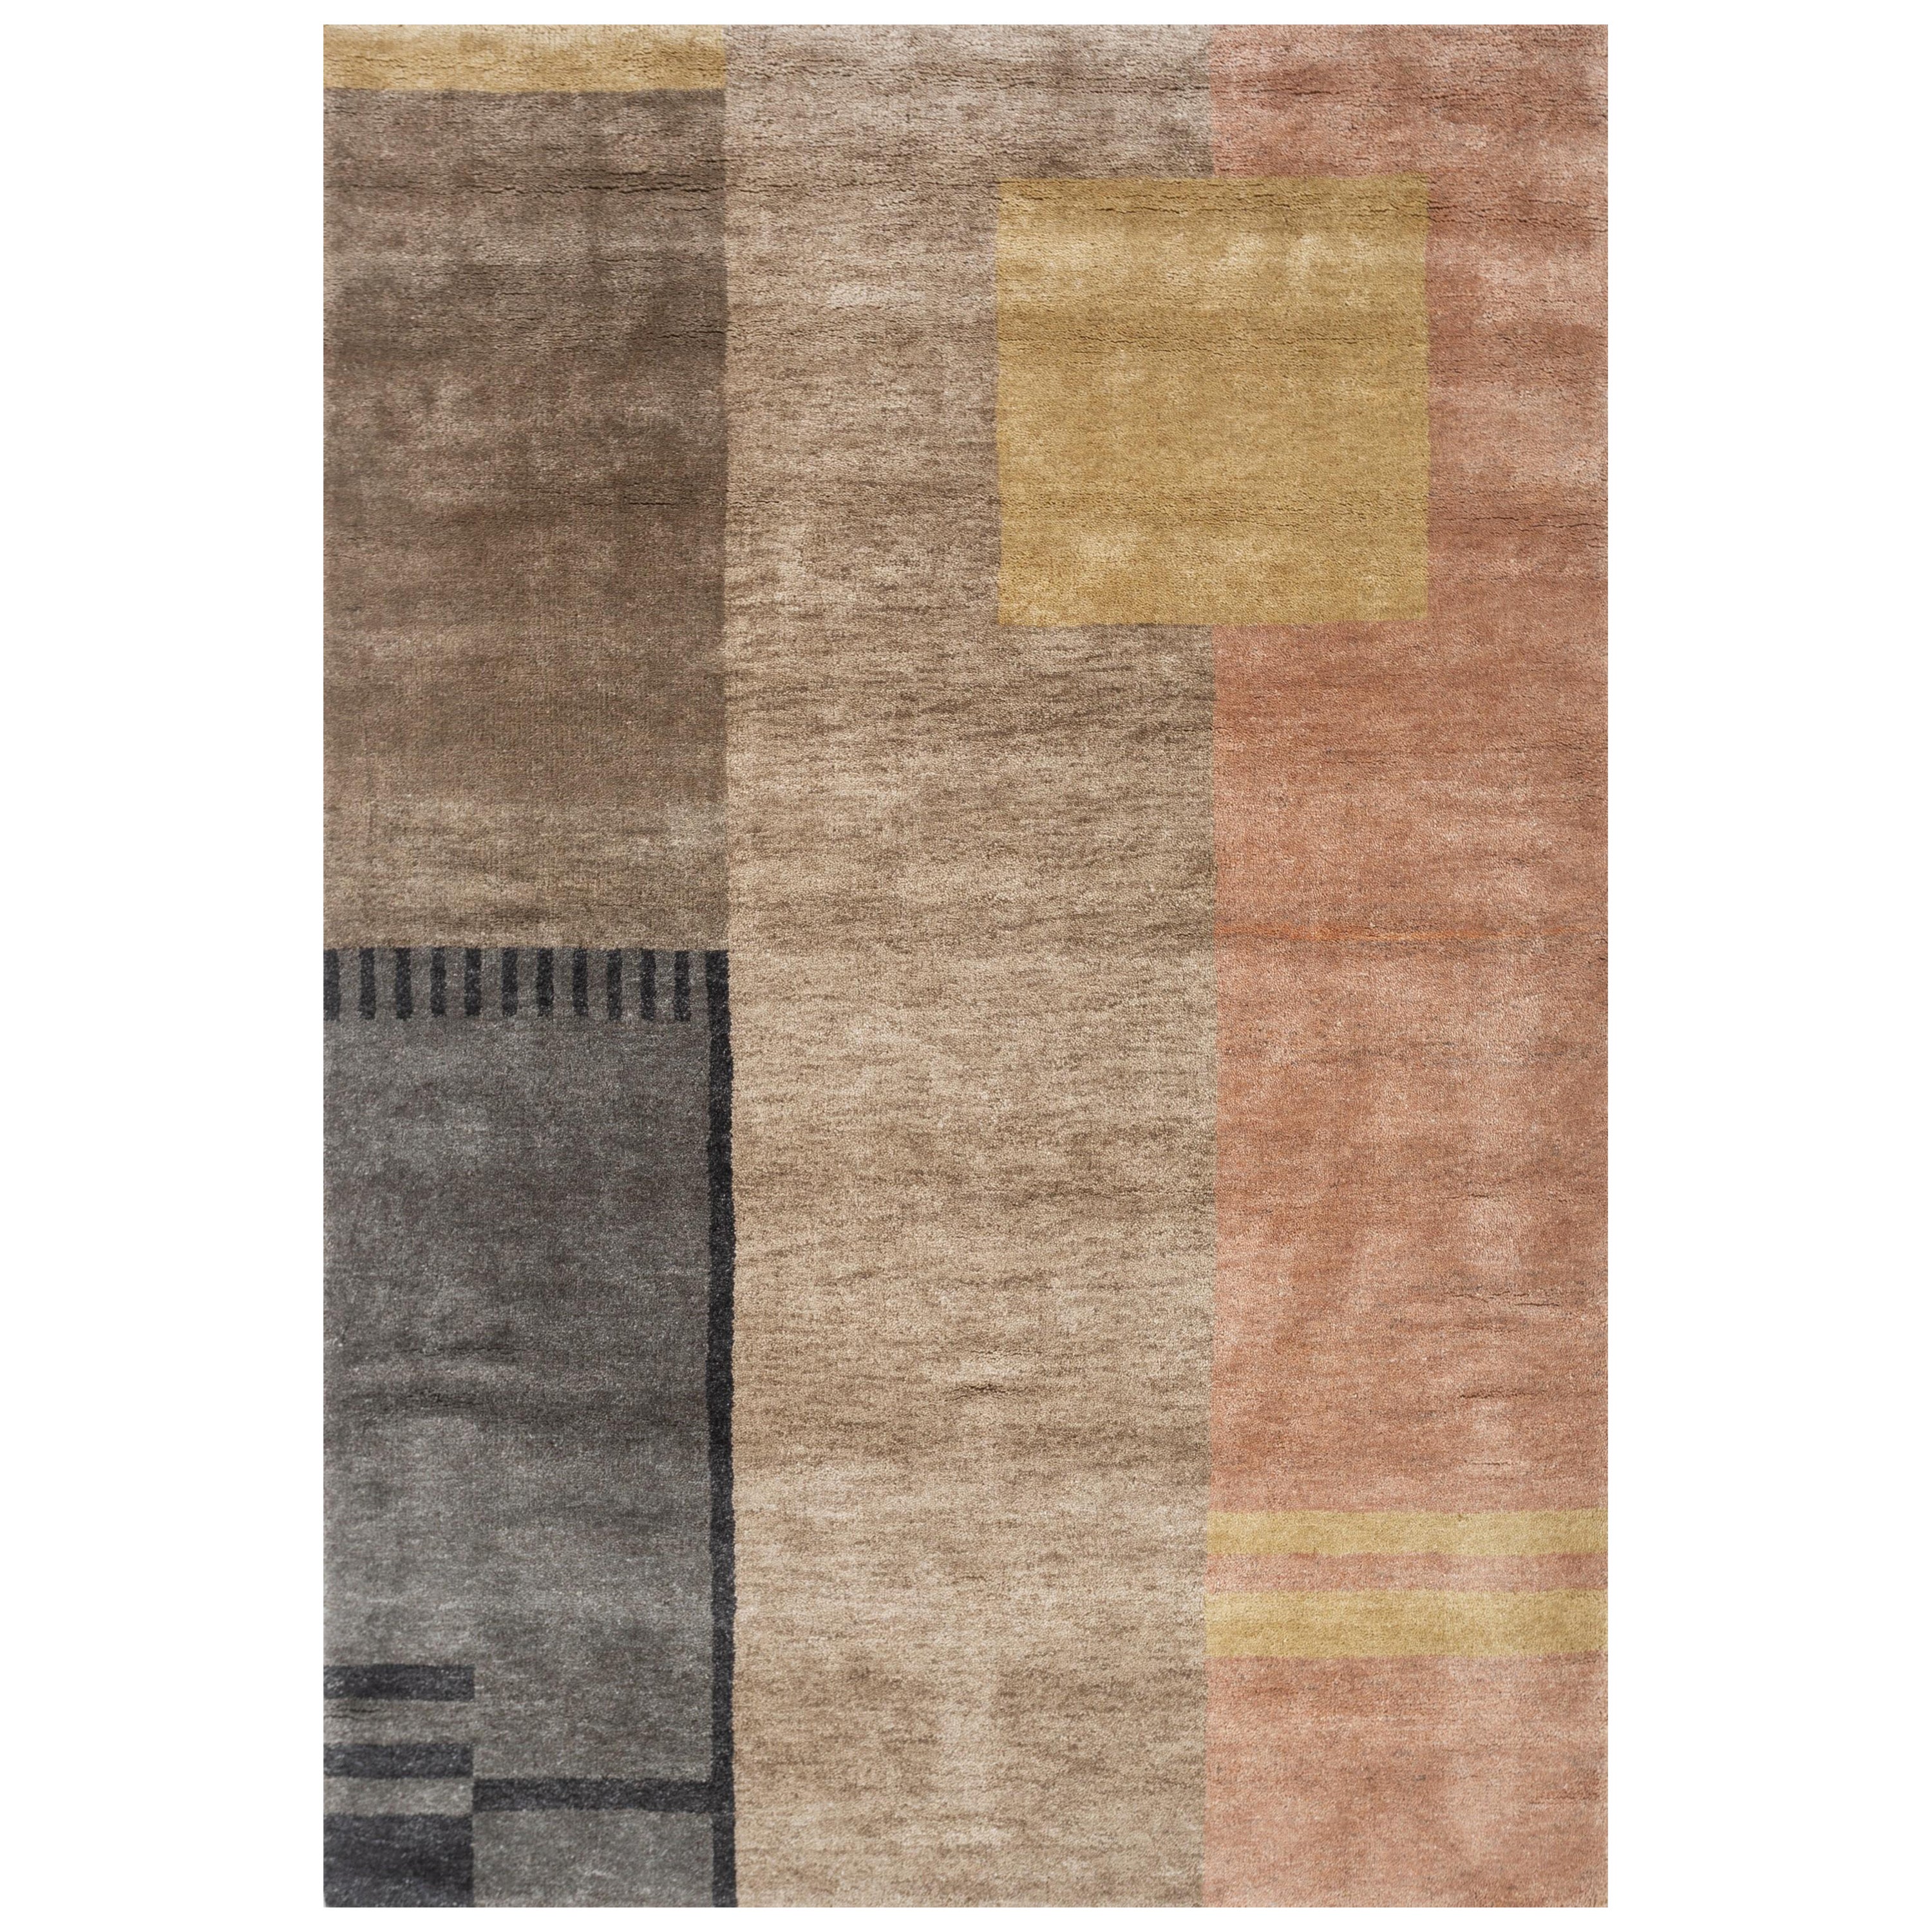 Urbane Loomscape Classic Beige & Apricot 180X270 cm Handknotted Rug For Sale